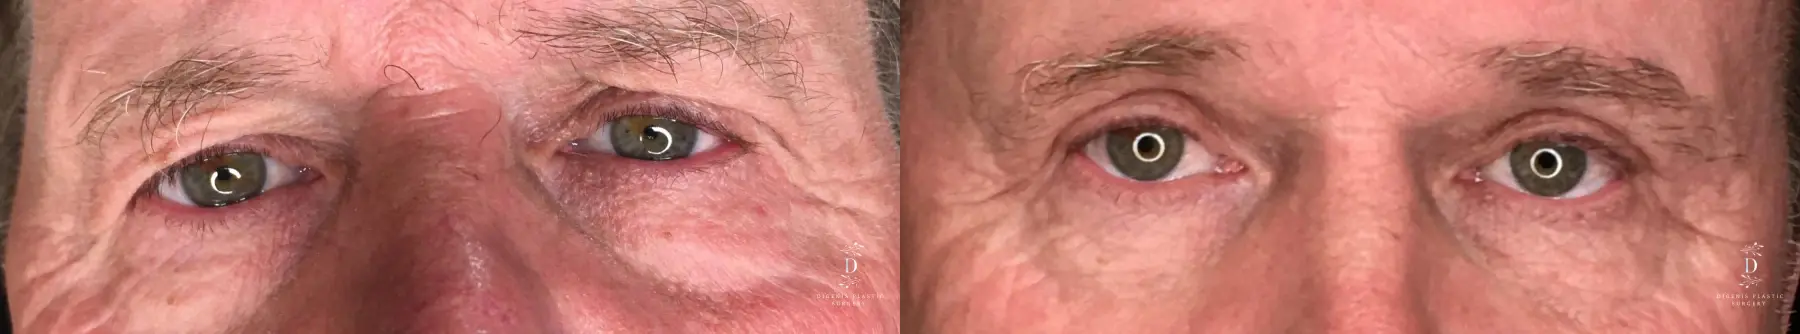 Eyelid Surgery: Patient 31 - Before and After 1